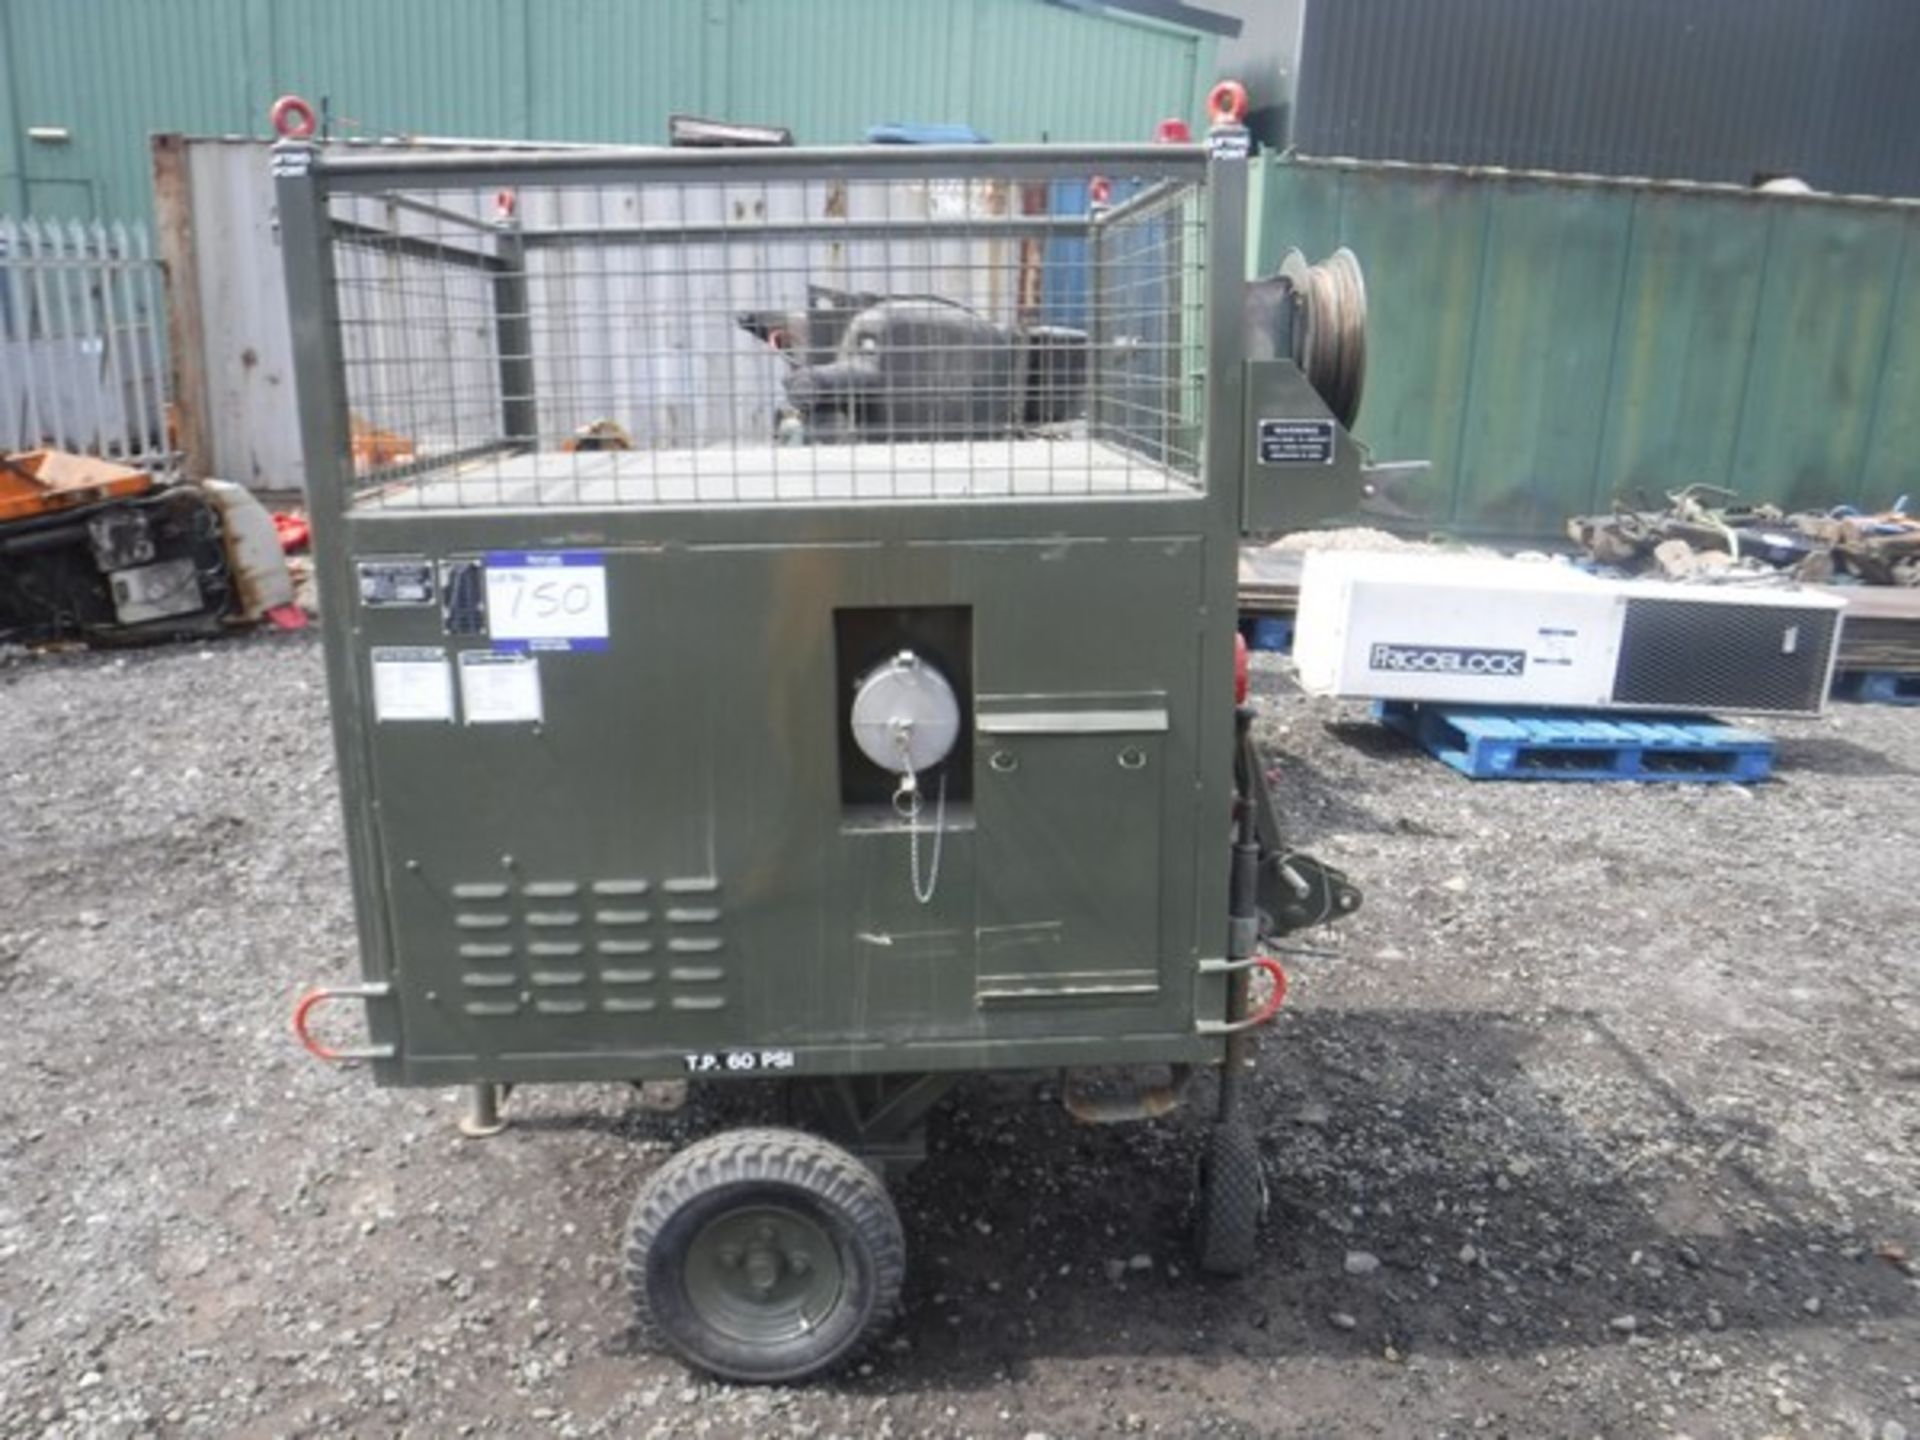 2000 DEHUMIDIFICATION trolley for small aircraft with Lister Petter diesel engine generator 1301hrs - Image 2 of 6